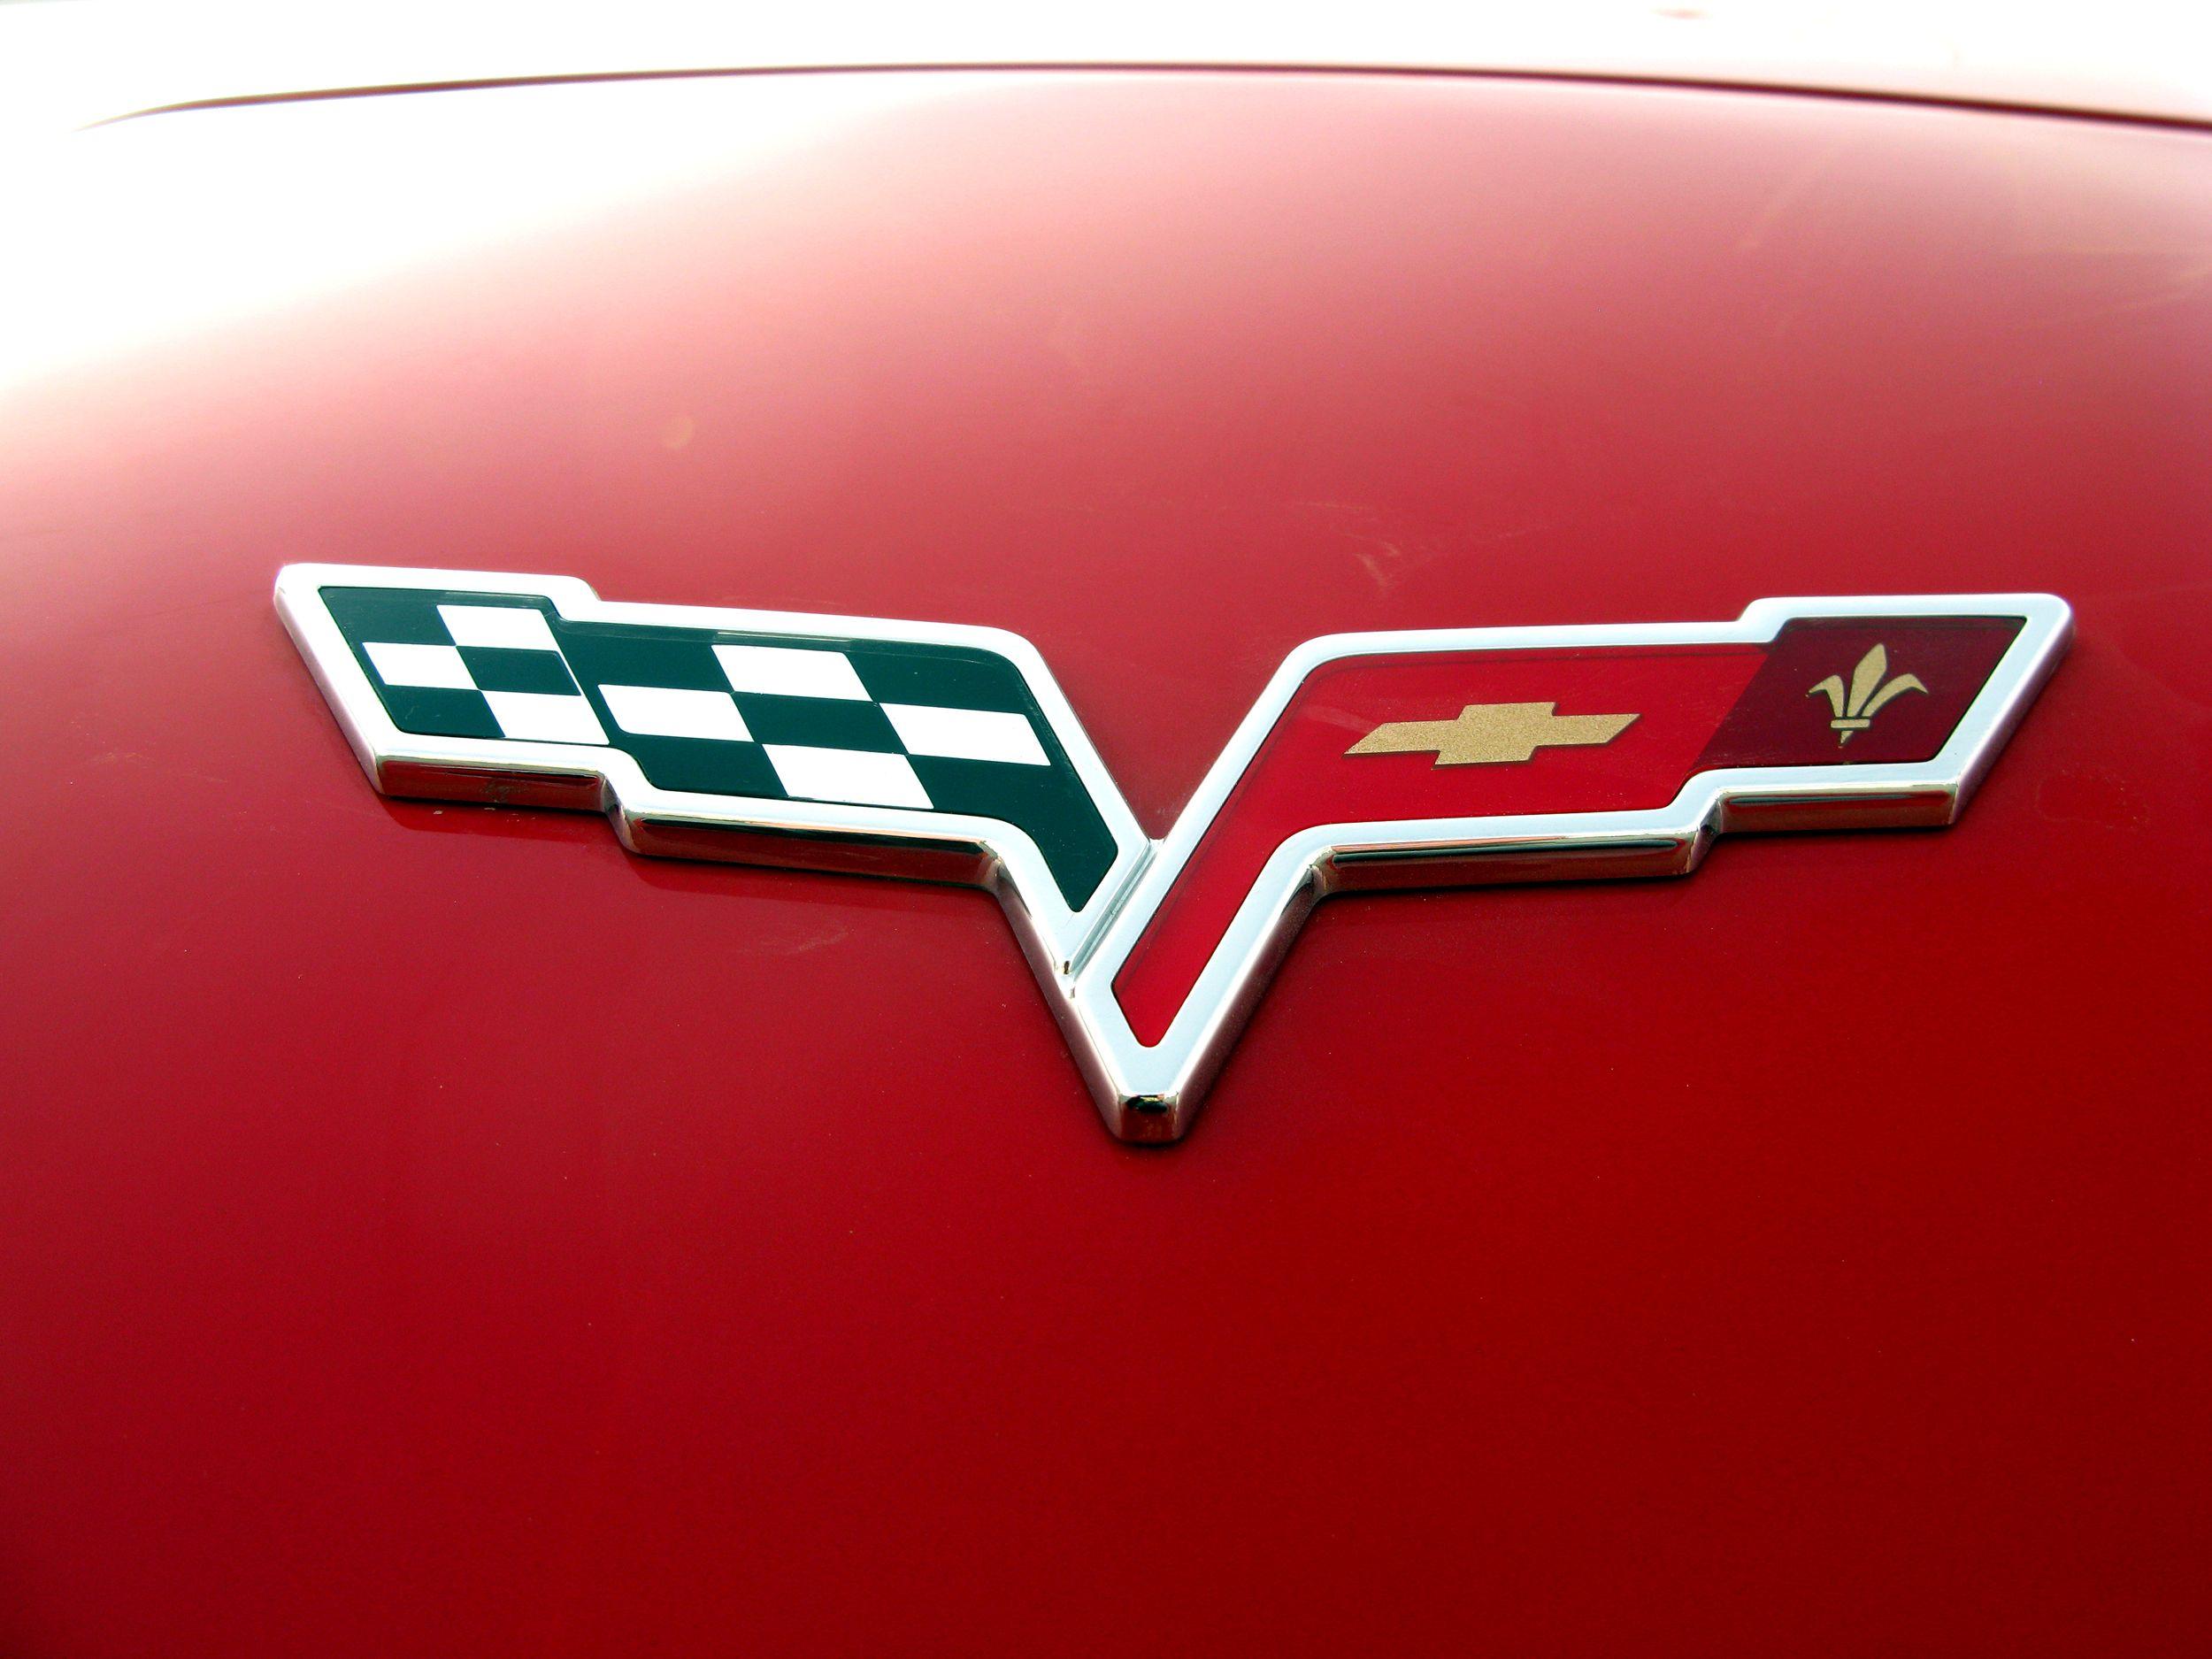 Old Chevrolet Car Logo - Chevy Logo, Chevrolet Car Symbol Meaning and History | Car Brand ...